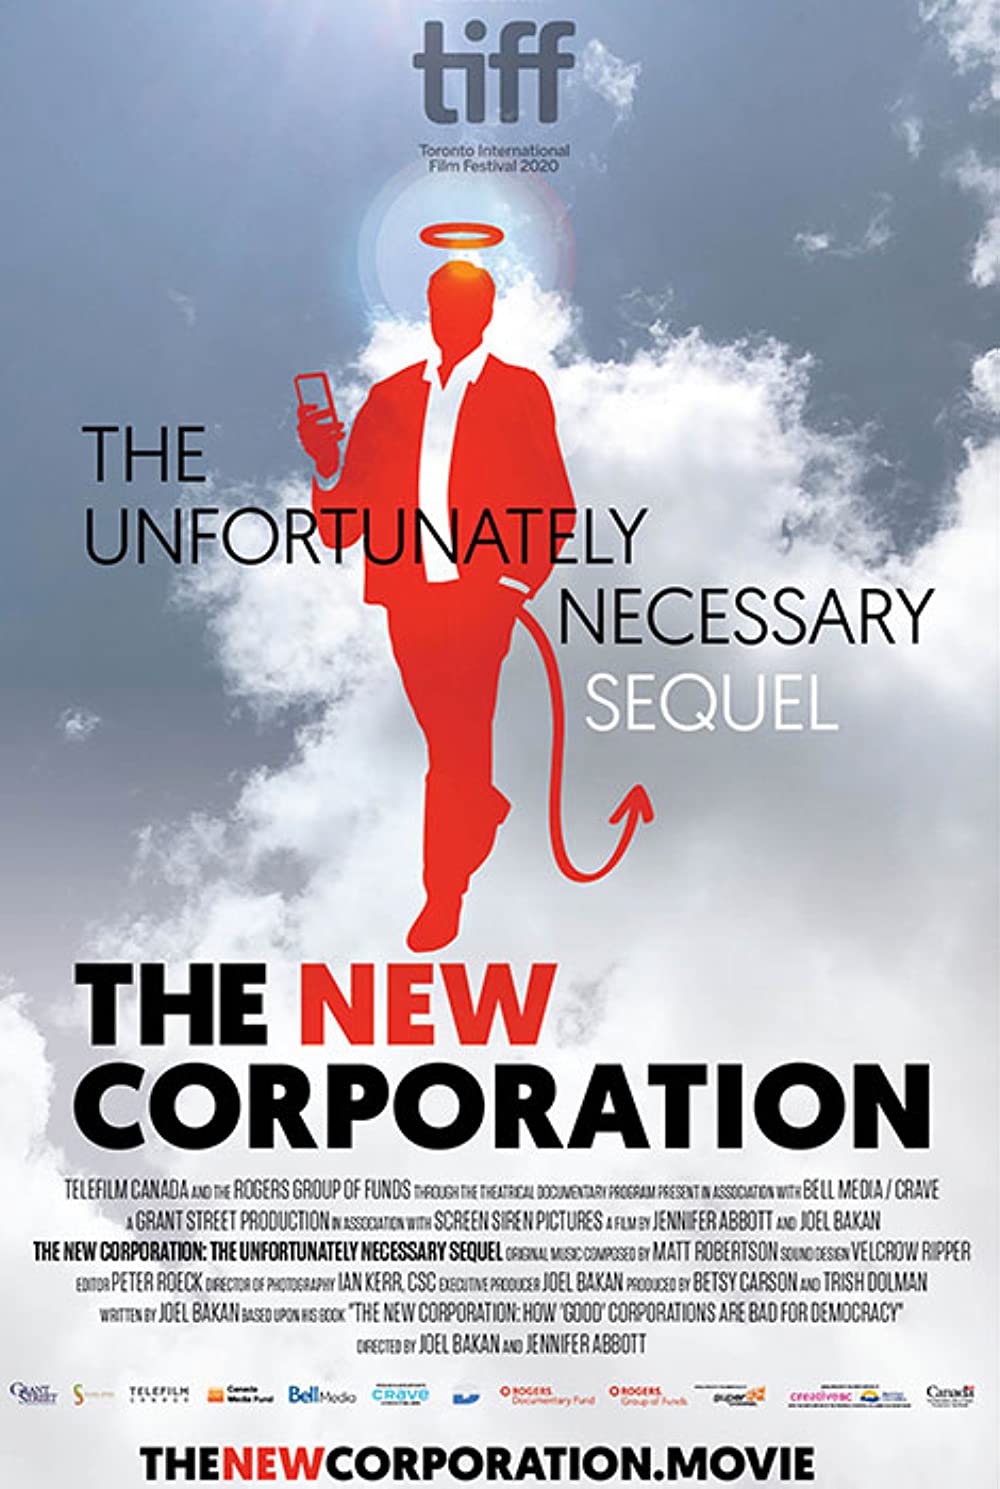 film cover for the new corporation, with red man in suit and devil tail